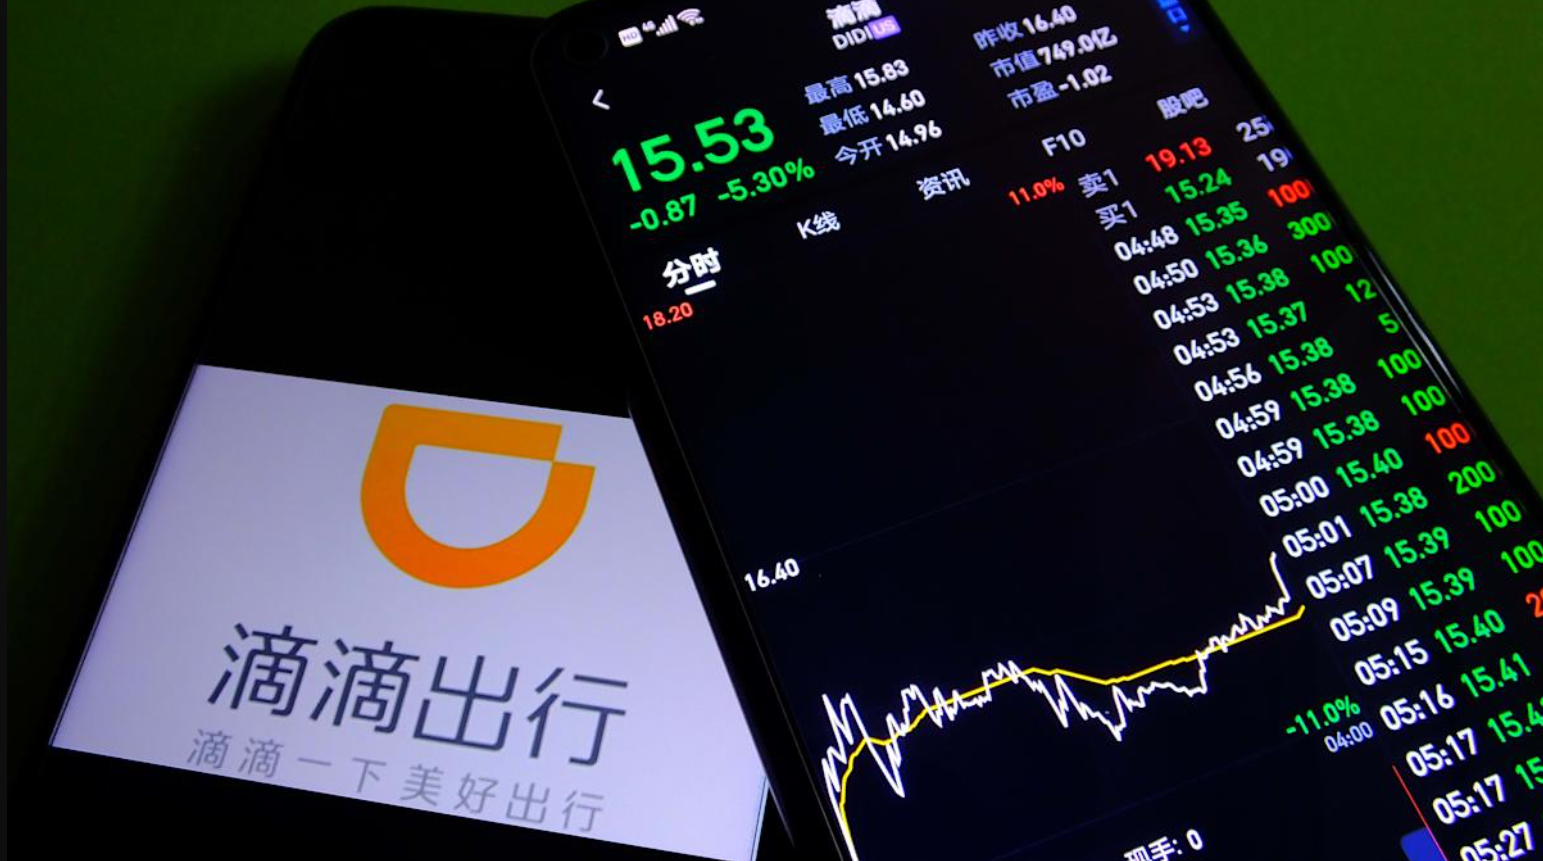 Didi's stock jumps 50% on report that China's probe is ending